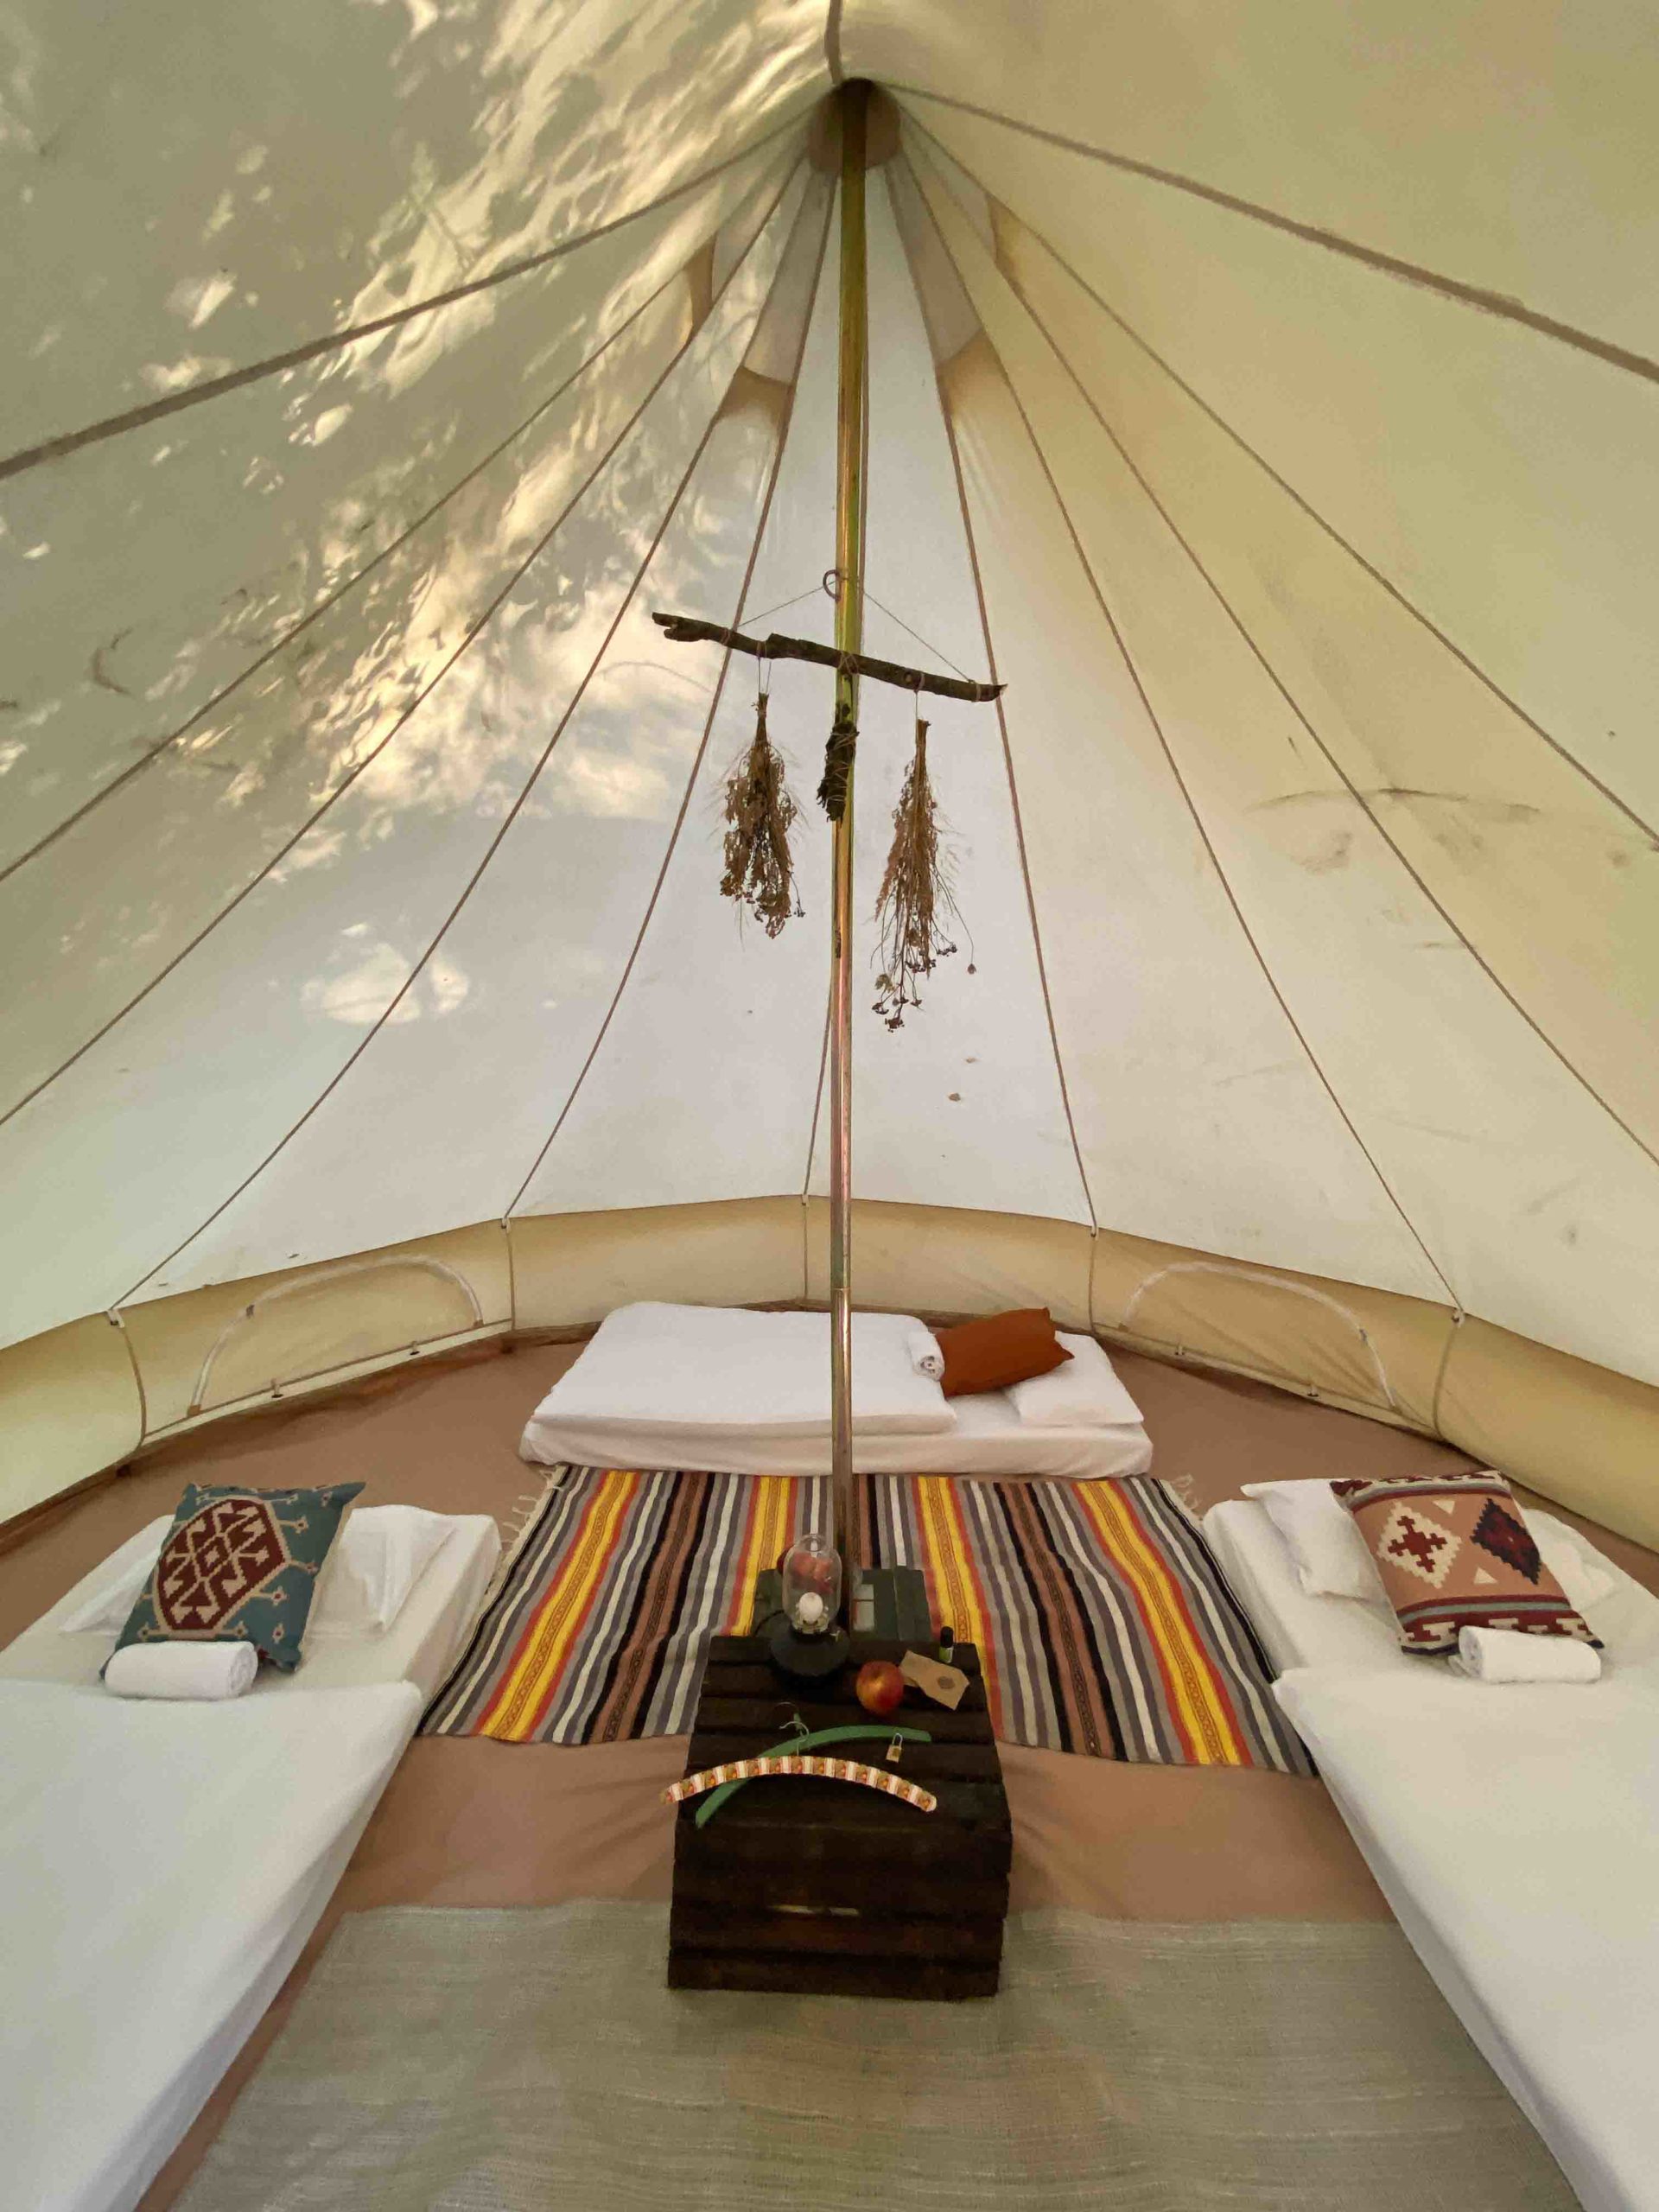 The Tent Hotel comes to life every August during the Garbicz Festival